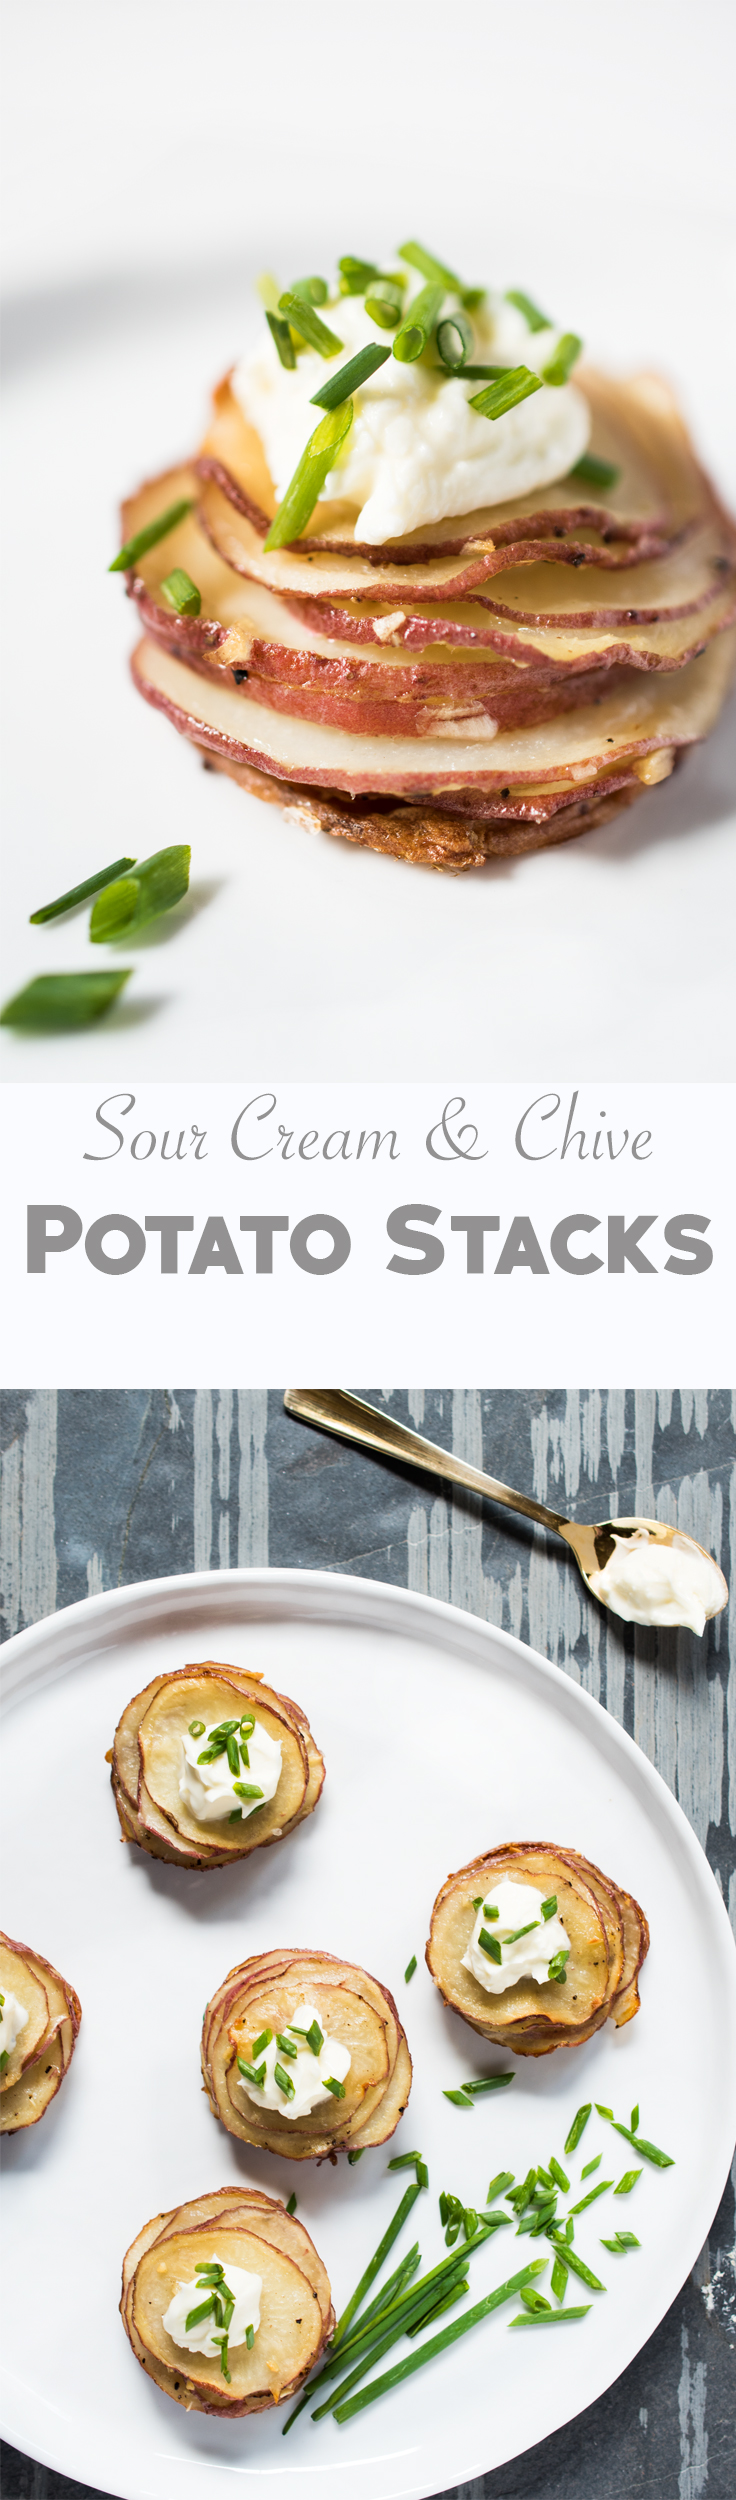 These Sour Cream and Chive Potato Stacks make an elegant presentation but they're so easy to prepare.